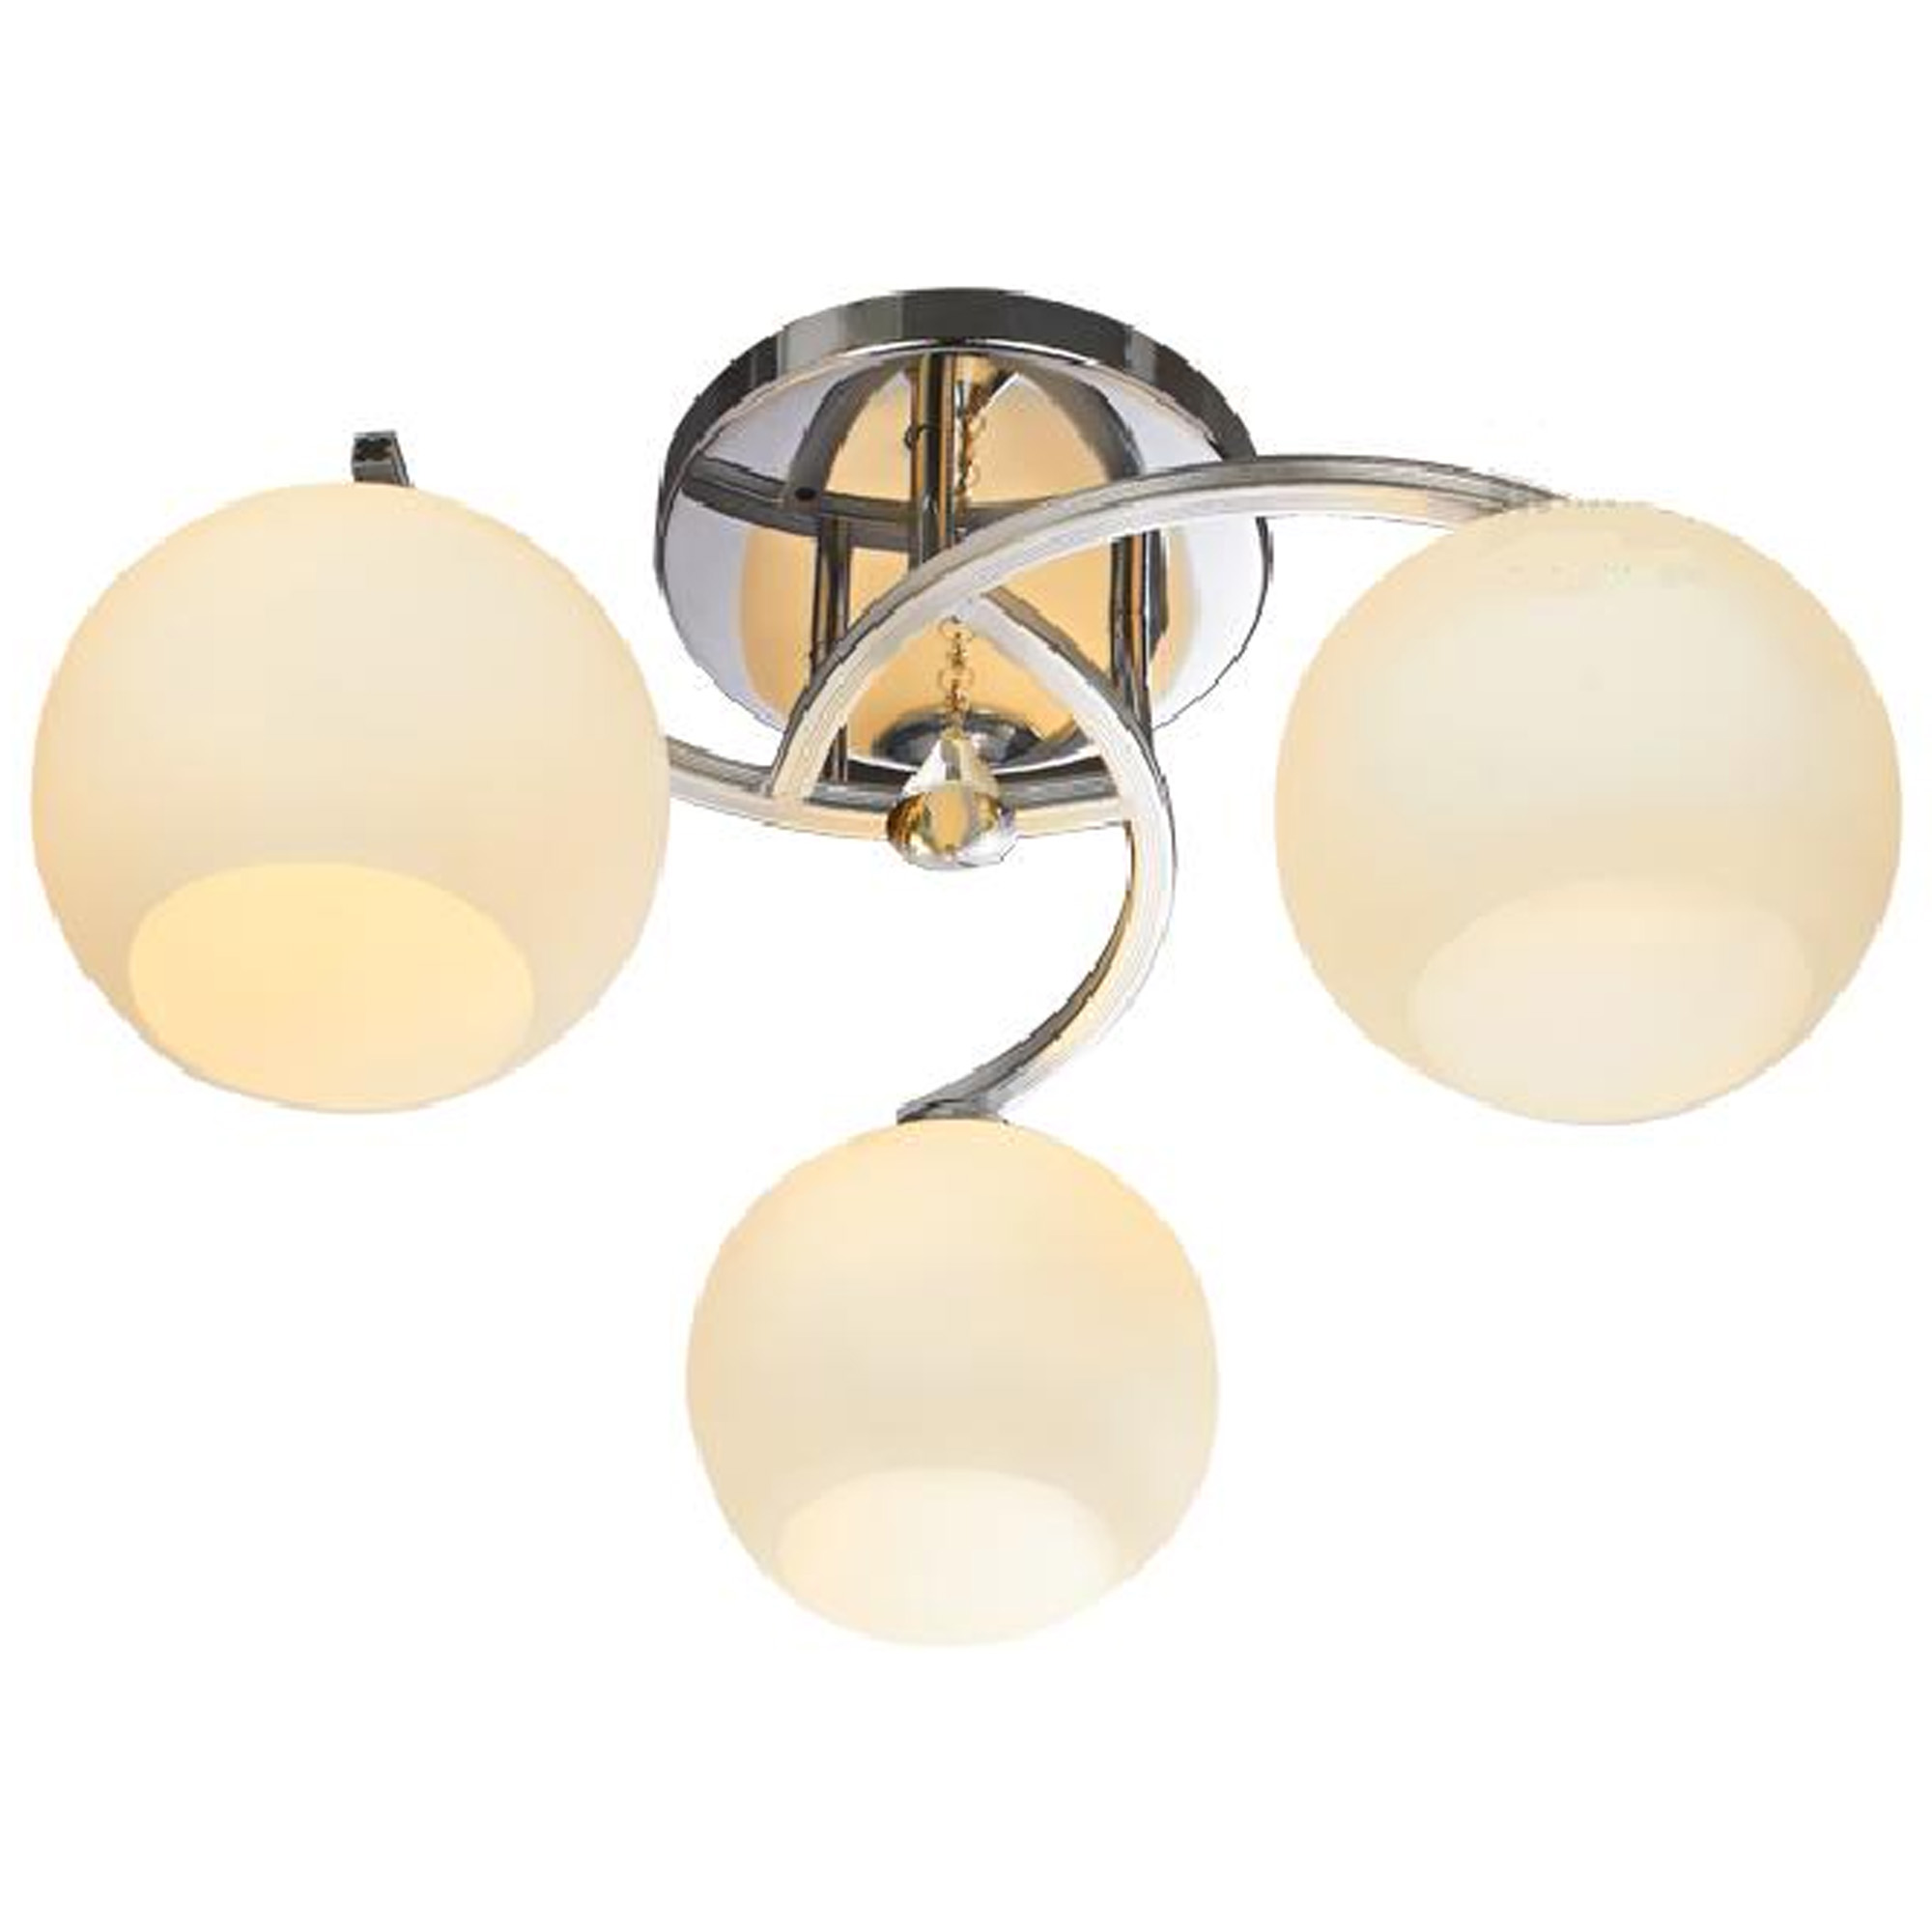 Residential decorative  lamp HL-9527-3X-1.Residential decorative ceiling lamp HL-9527-3X    2. it is fit for your dinning room, living room and hotels.Lighting adding to a sense of mystery with its unique shape and aesthetic lighting for the home life